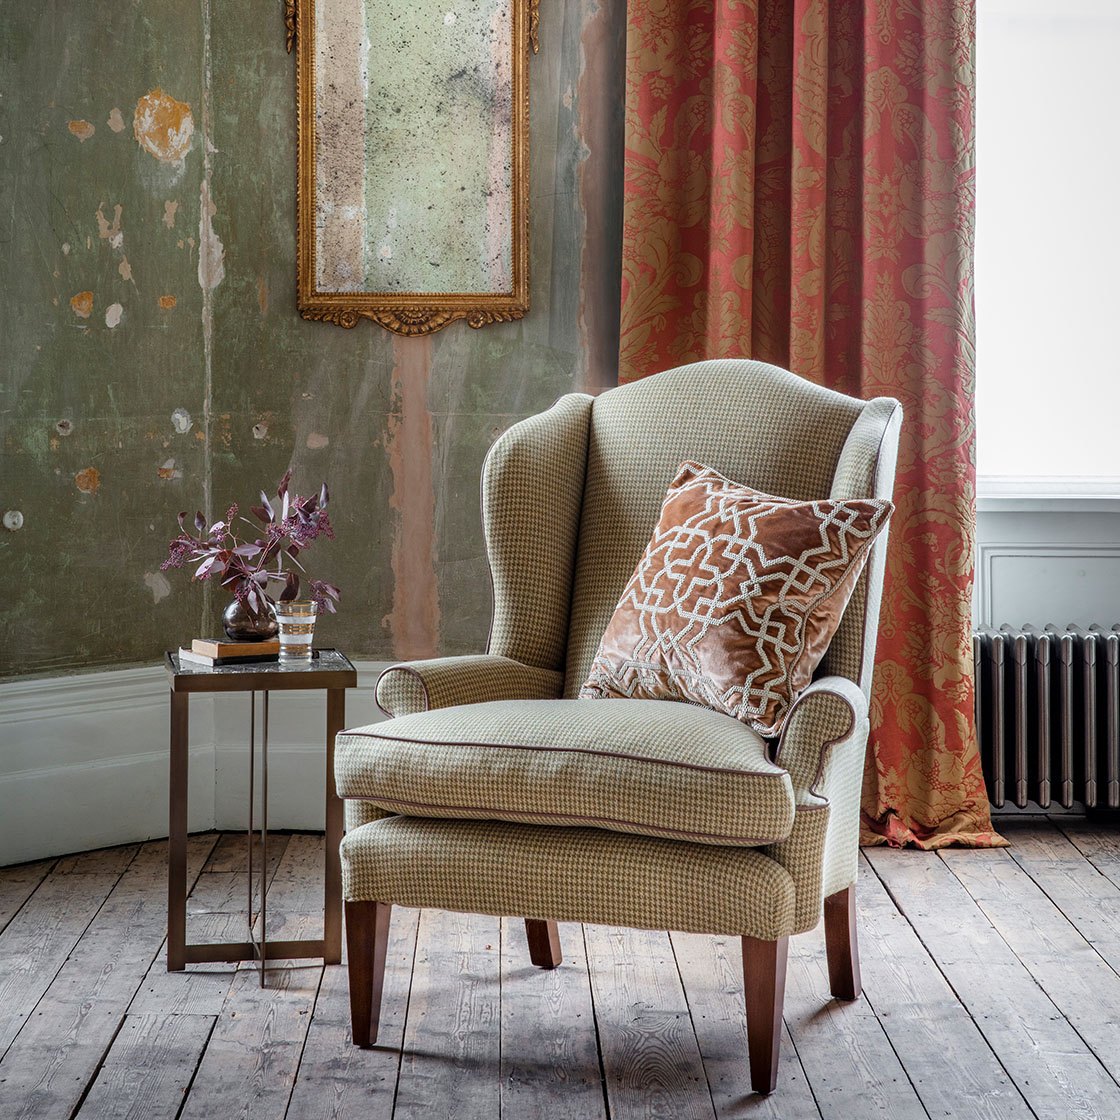 Clubwing chair in Argyll check - Lichen with Windsor mirror - Beaumont & Fletcher